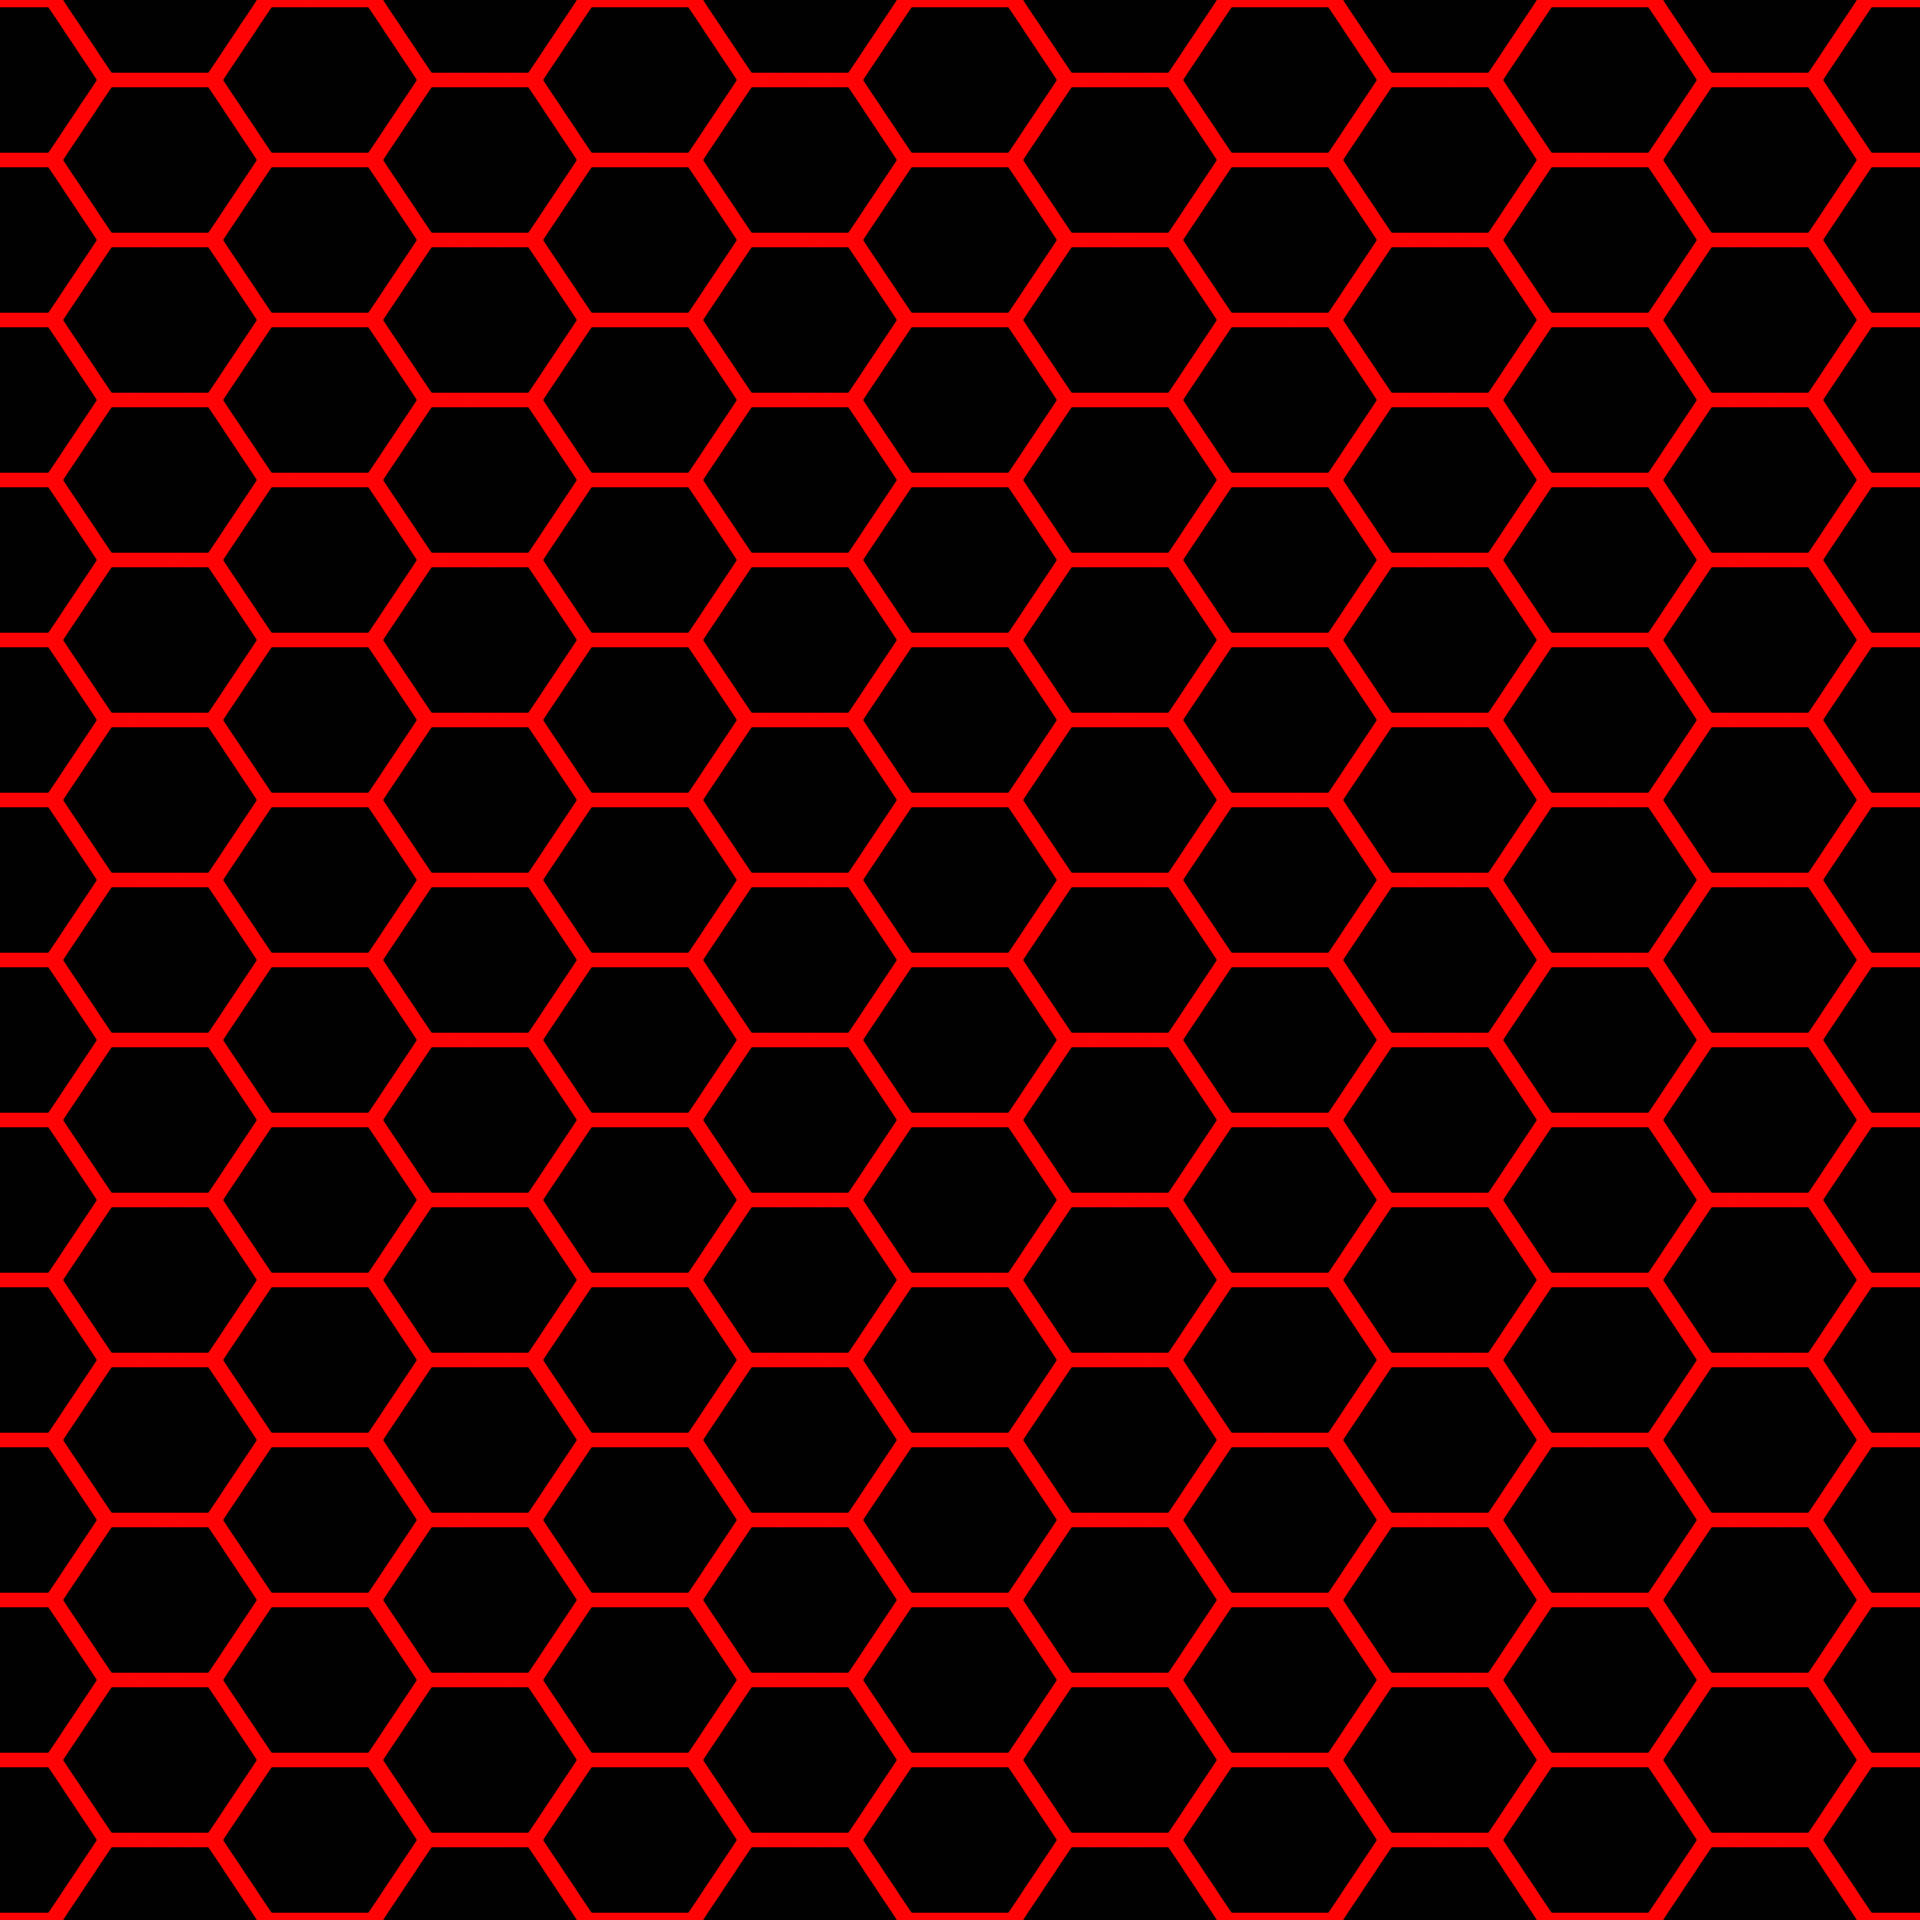 1920x1920 101 Hexagon Wallpapers \u0026 Backgrounds For FREE